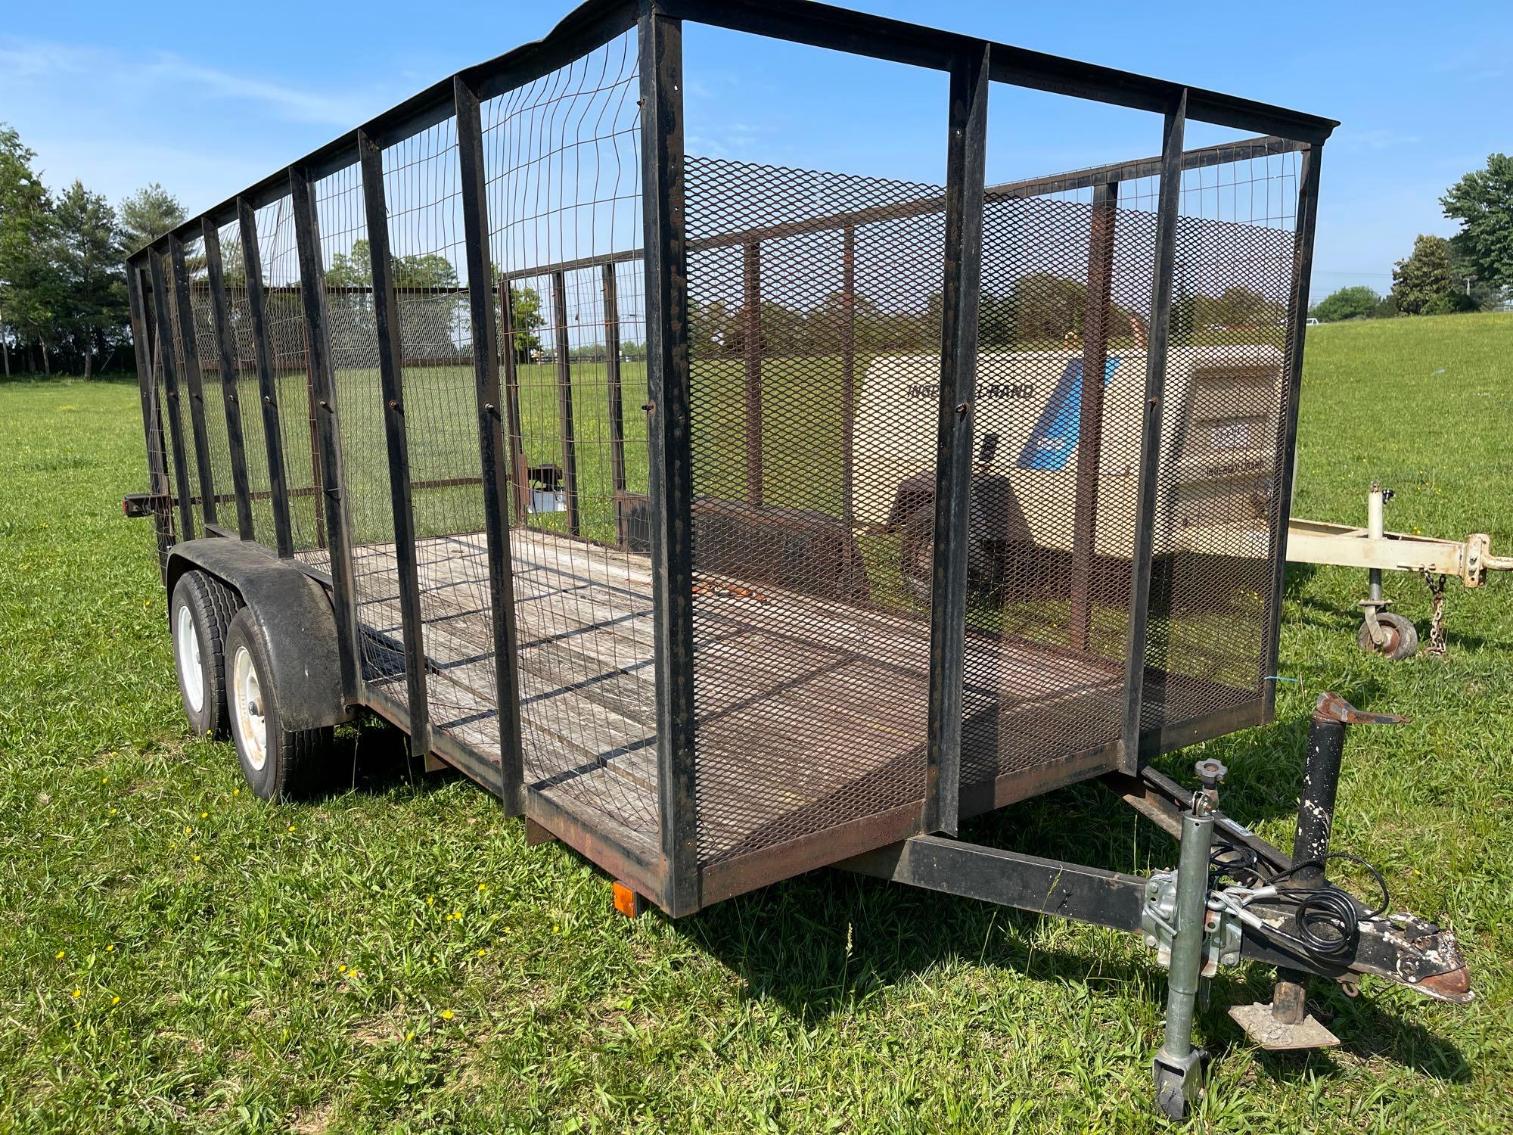 Image for 6'x16' Homemade Trailer w/ High Wire Sides. Assigned ID VA-381750-TR